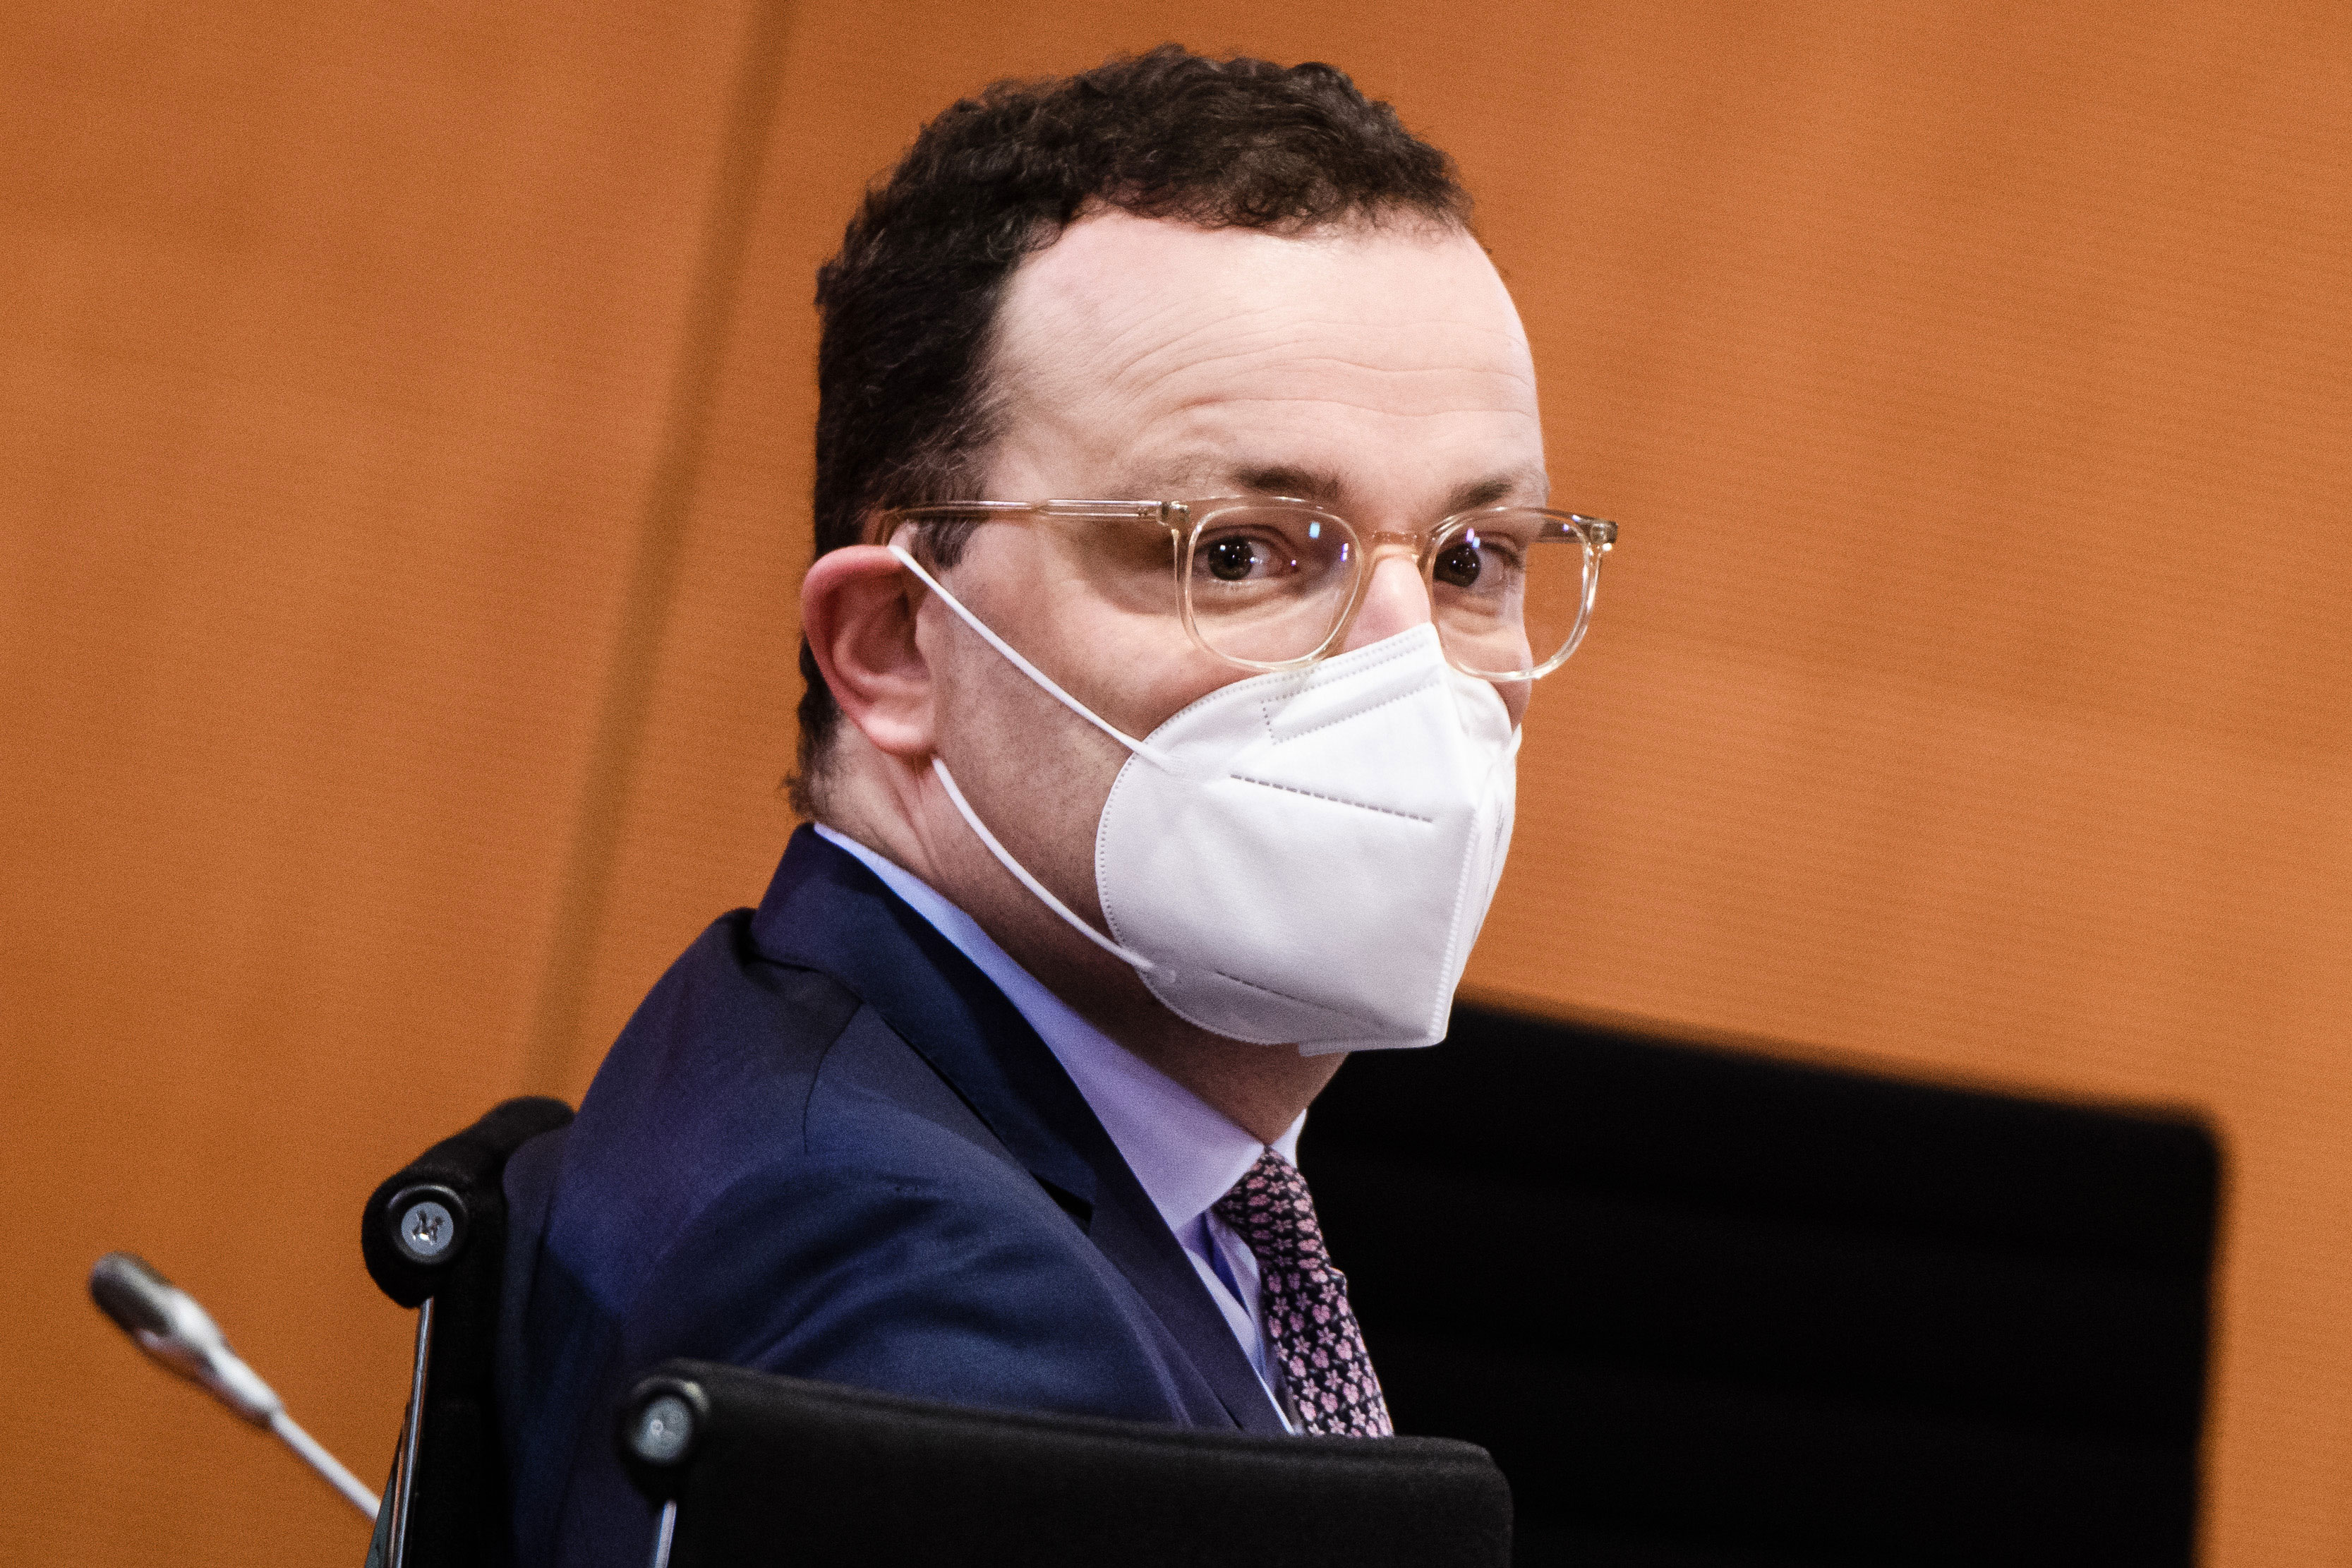 Jens Spahn, German health minister, attends a federal cabinet meeting at the Chancellery in Berlin on January 6.